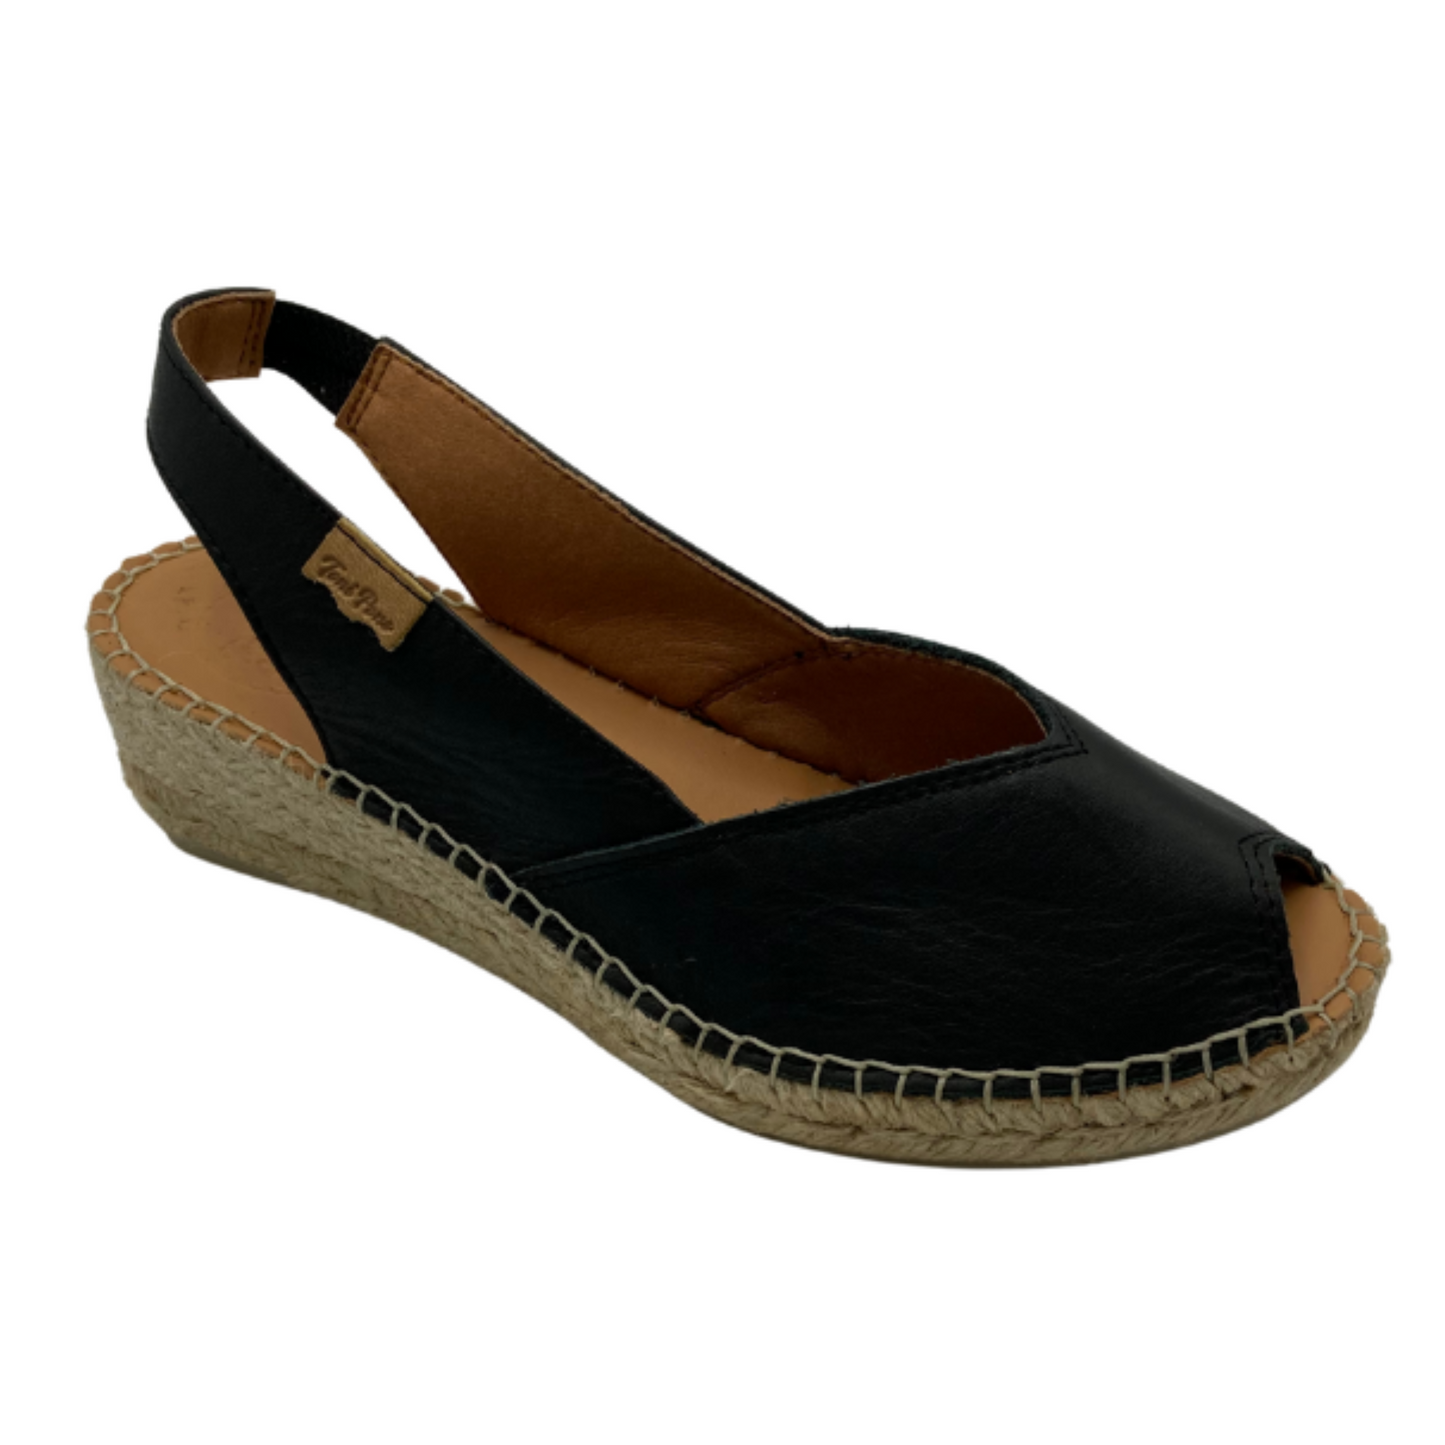 Angled side view of a black leather espadrille.  Low wedge sole, peep toe and open heel with a back strap